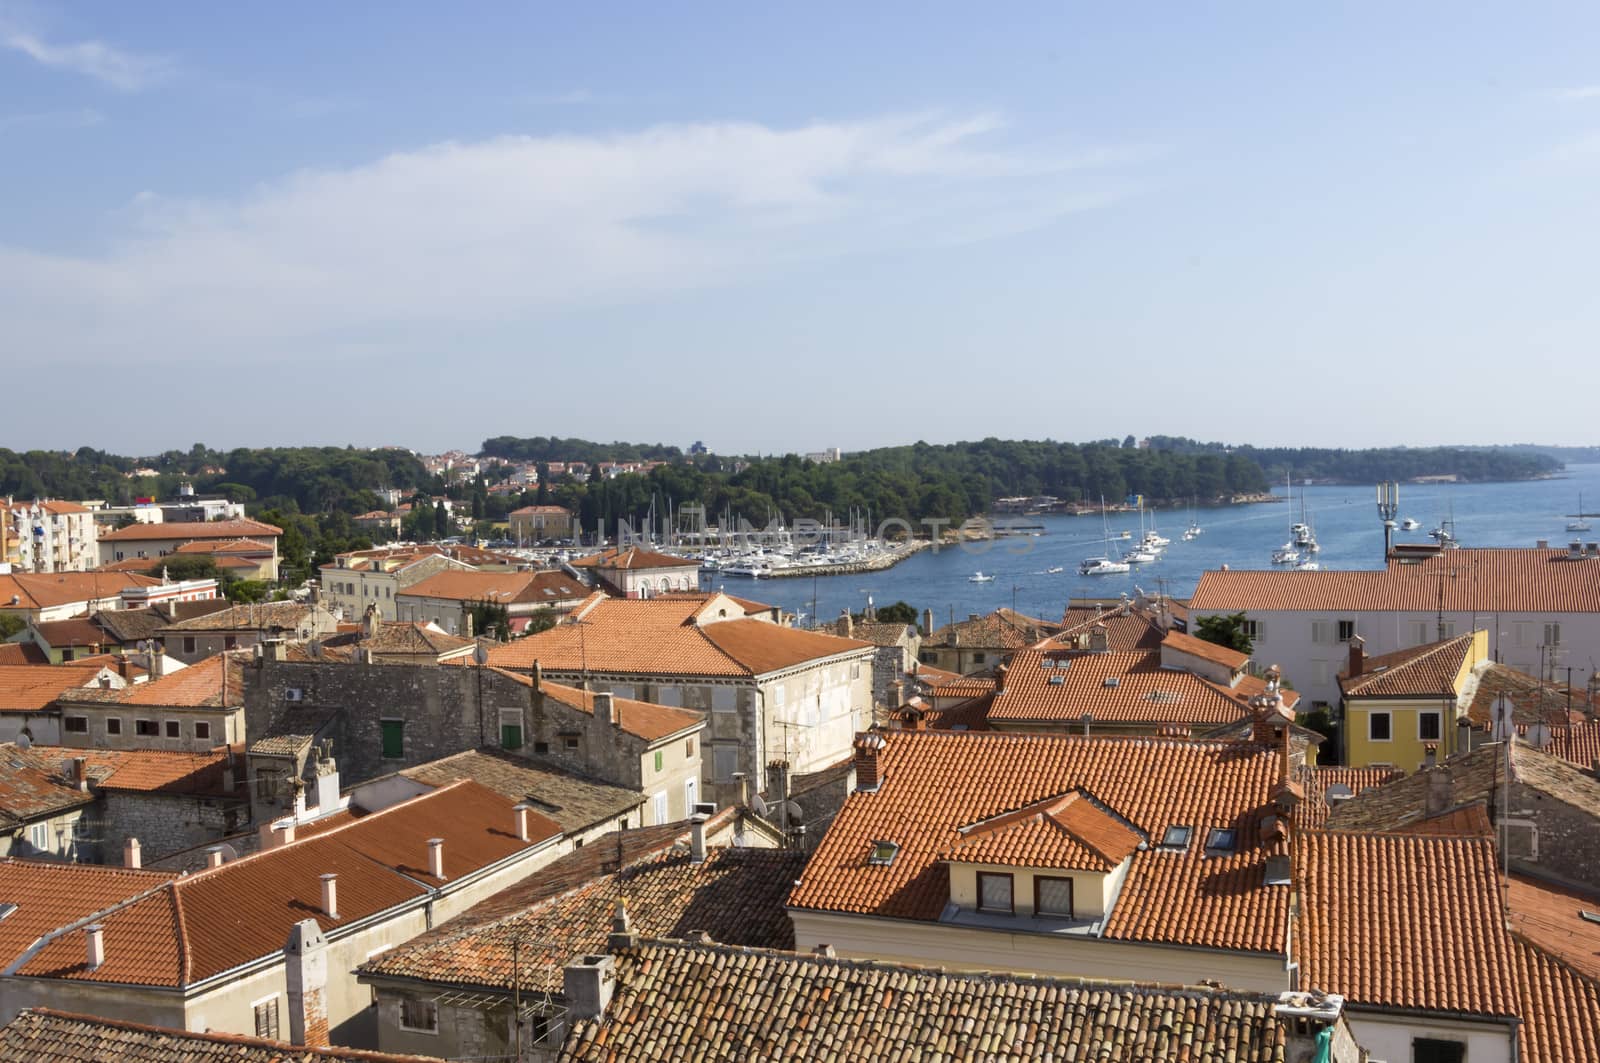 Panoramic view of down town Porec from the basilica tower, Istra, Croatia